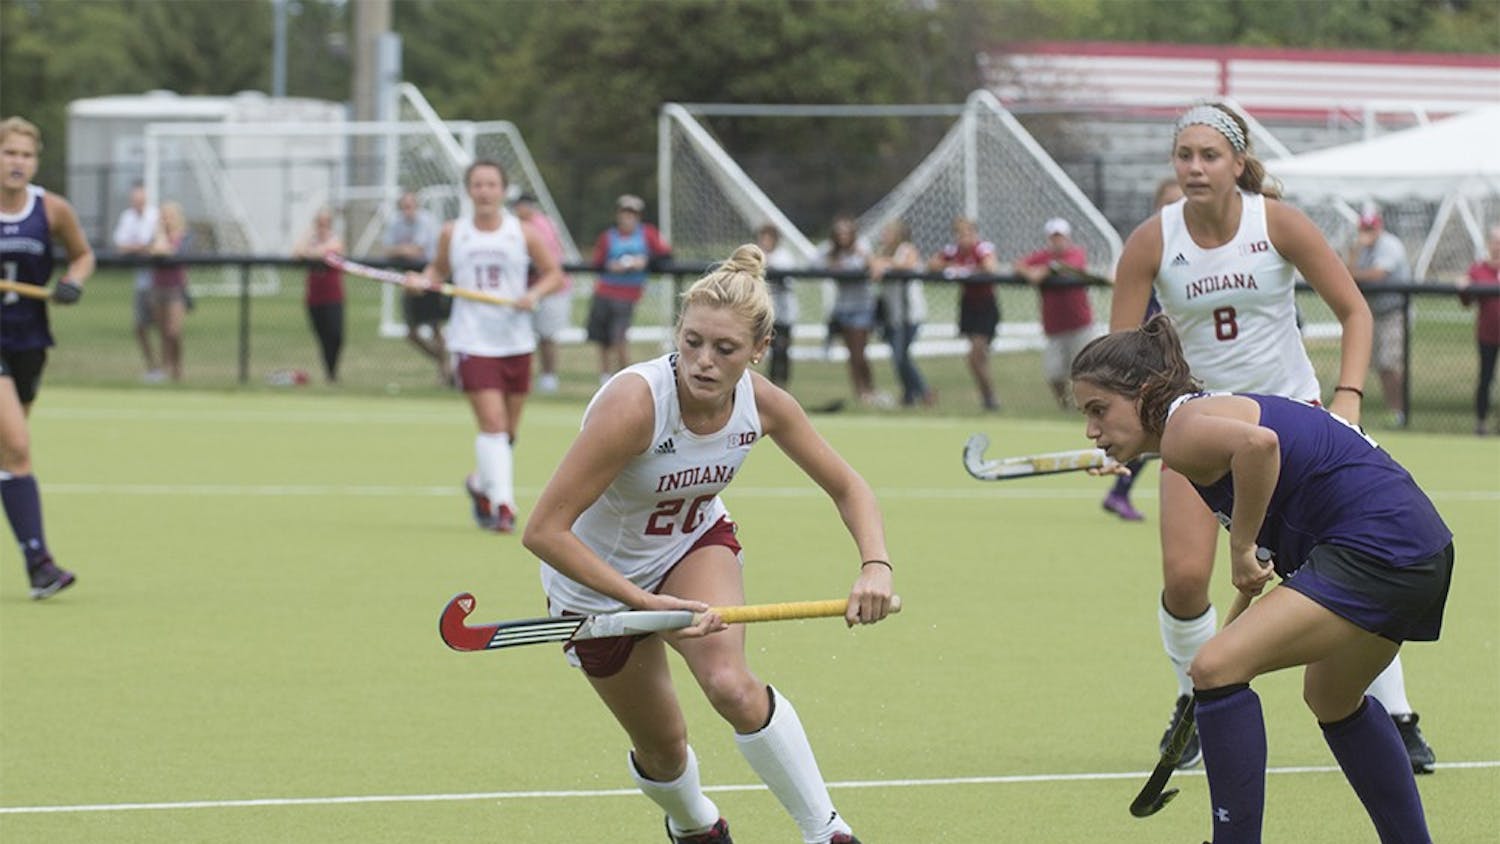 Sophomore Maddie Latino moves to evade a Northwestern defender on Sunday at the IU Field Hockey Complex. Latino was named Big Ten co-offensive player of the week for her performance in IU's victories over #16 Iowa and #14 Northwestern.